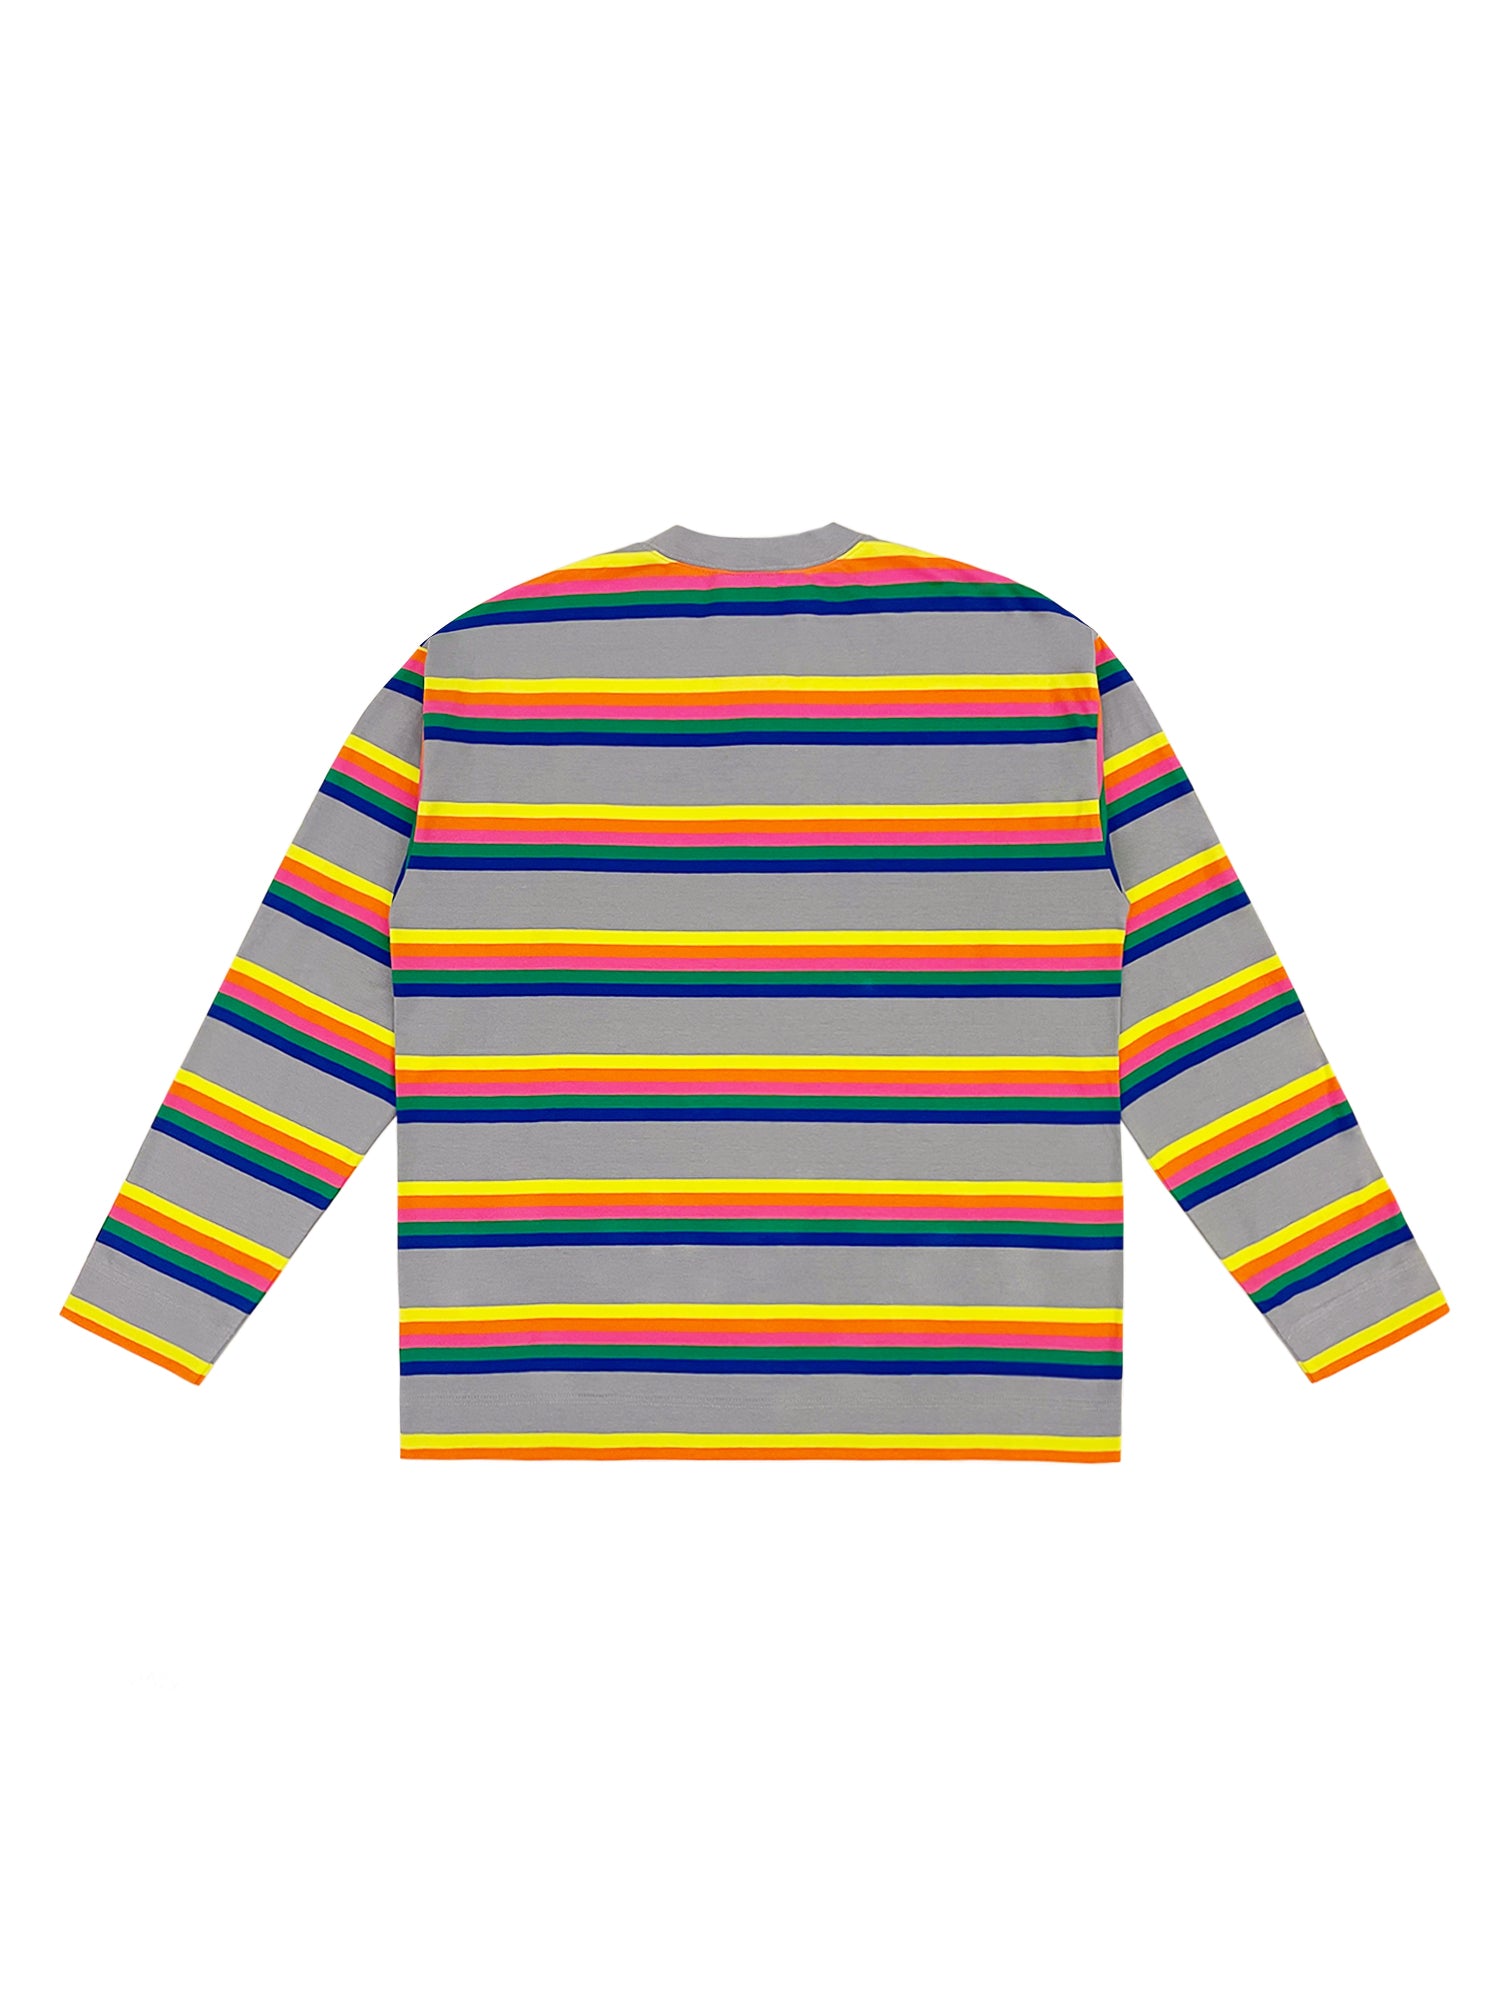 [ 517 LOVE WINS PROJECT ] GREY COLORFUL RAINBOW LONG SLEEVES SHIRT